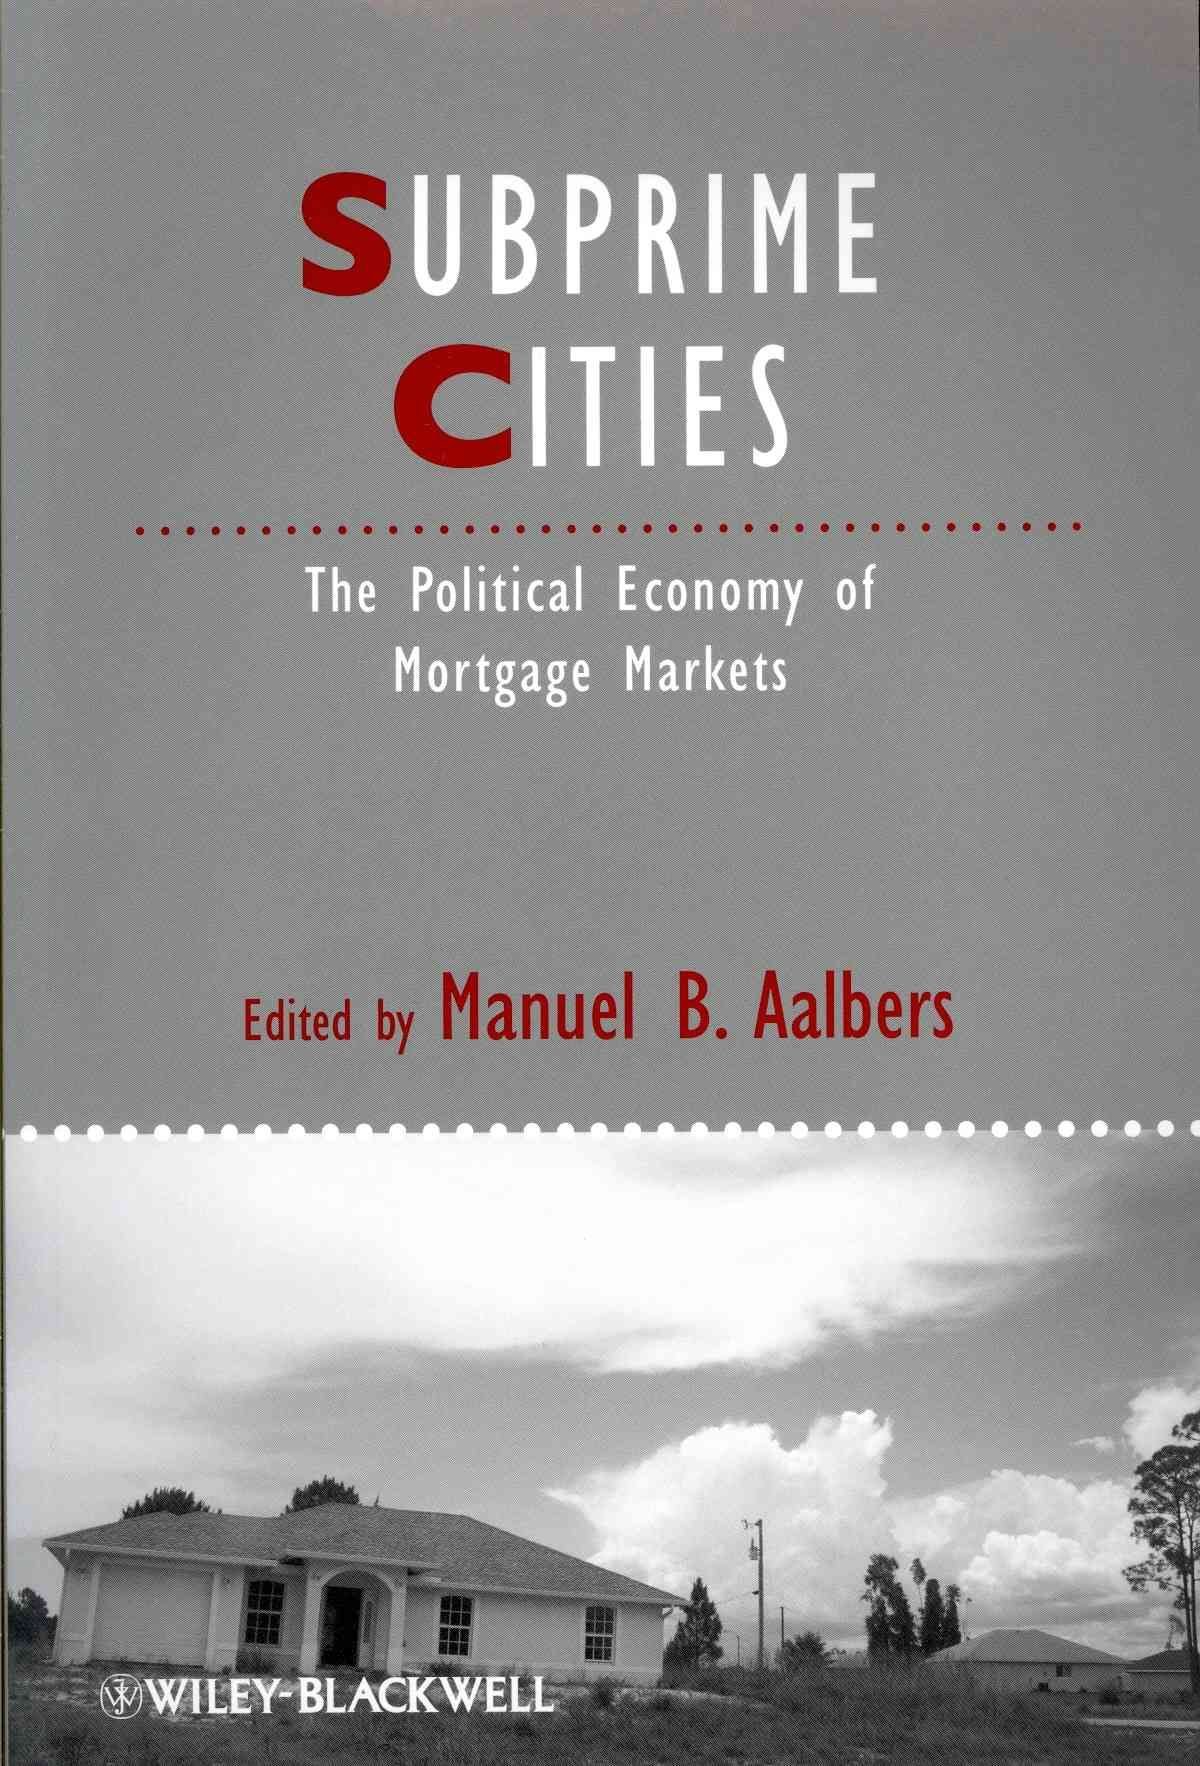 Subprime Cities - The Political Economy of Mortgage Markets